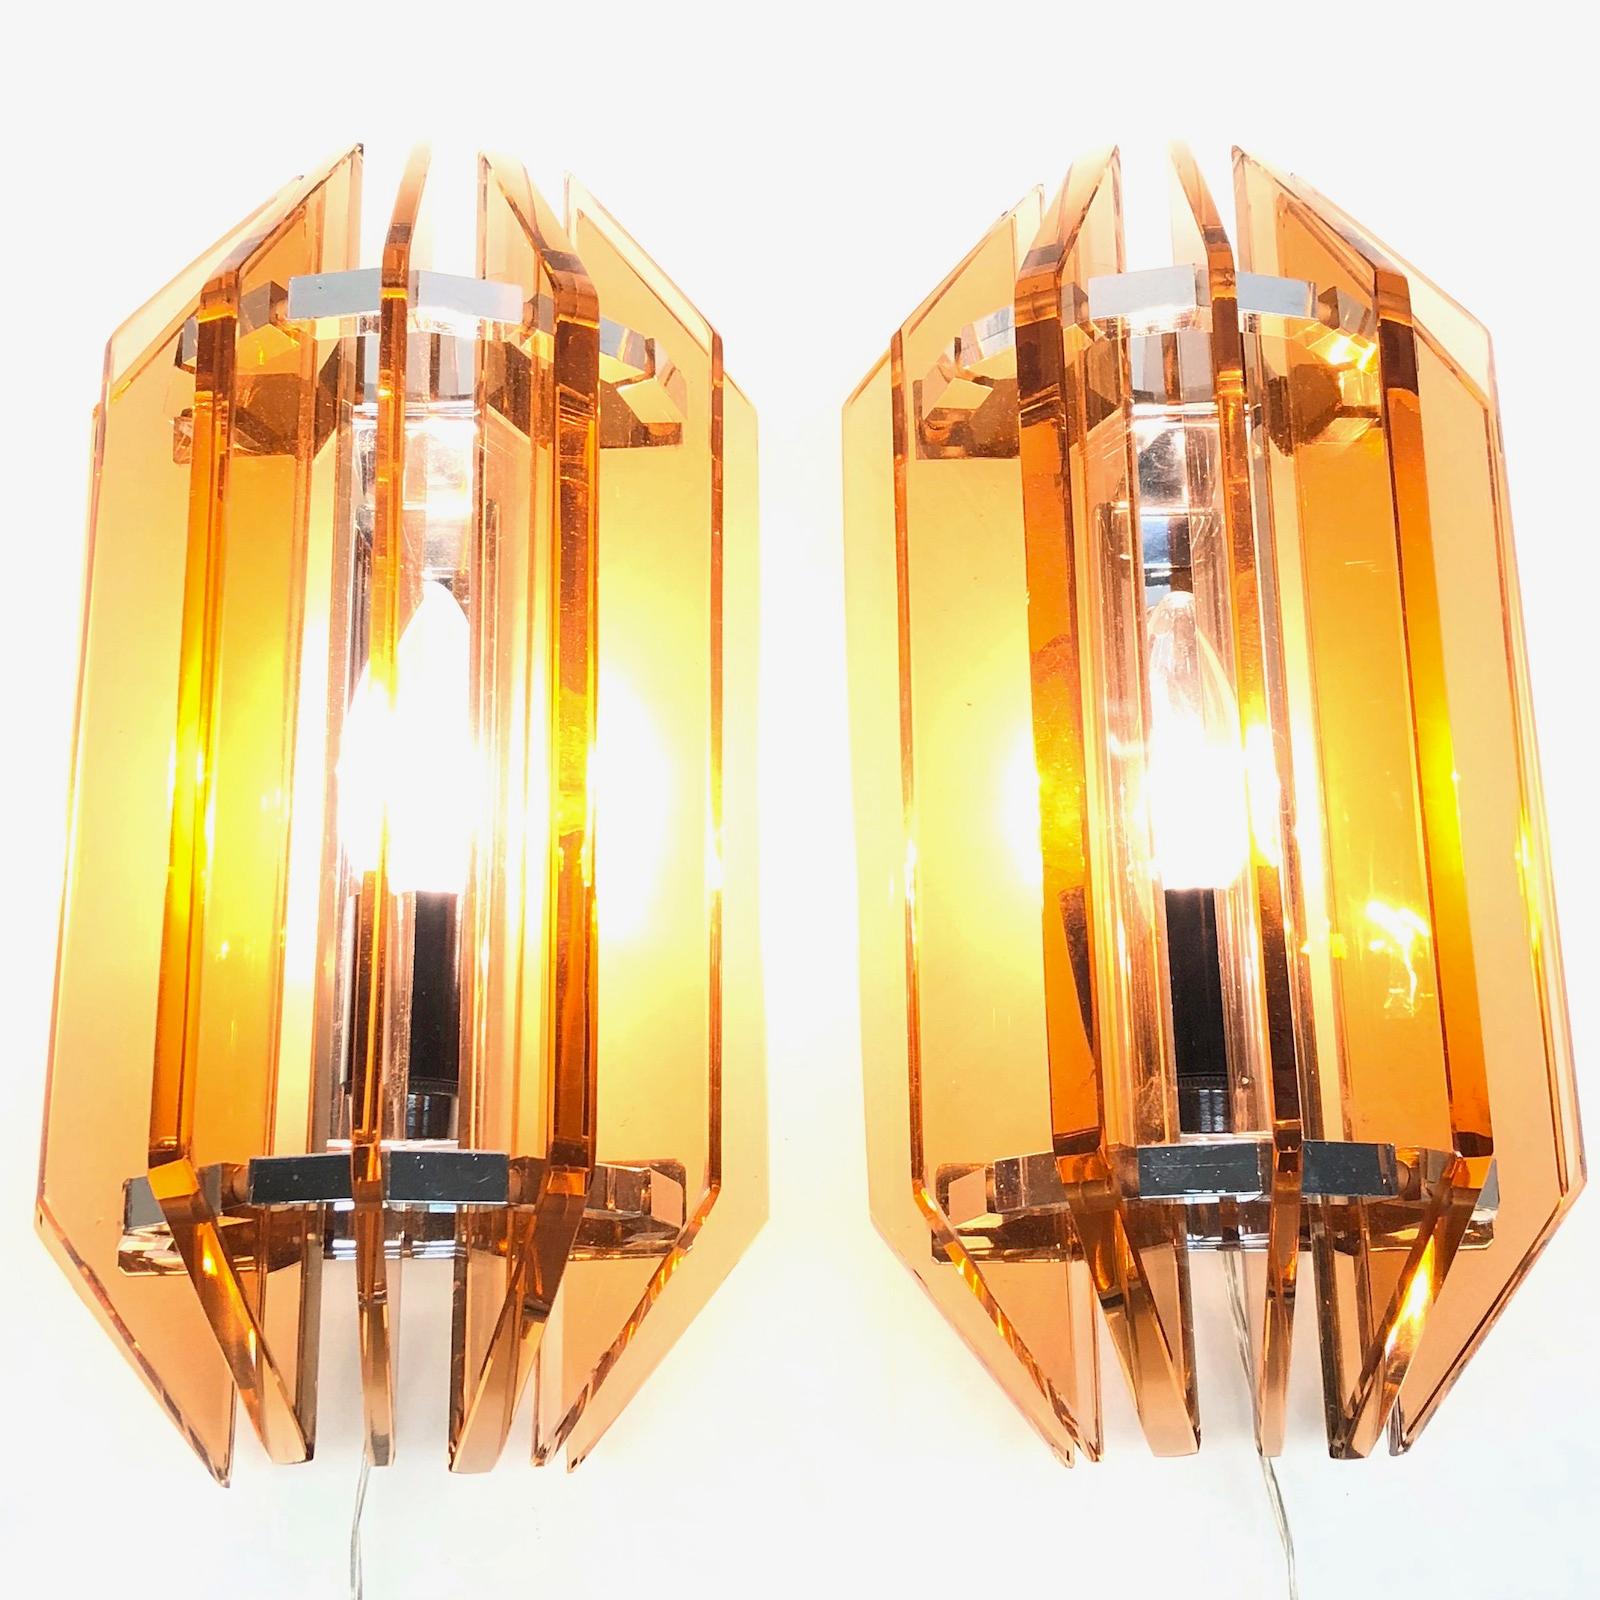 A very nice and elegant pair of Italian sconces made by Veca, Italy, in the 1970s. These vintage lights feature handmade, colored glass and the chrome metal frame giving the lights a Minimalist, simple and pleasing contemporary form. Each fixture